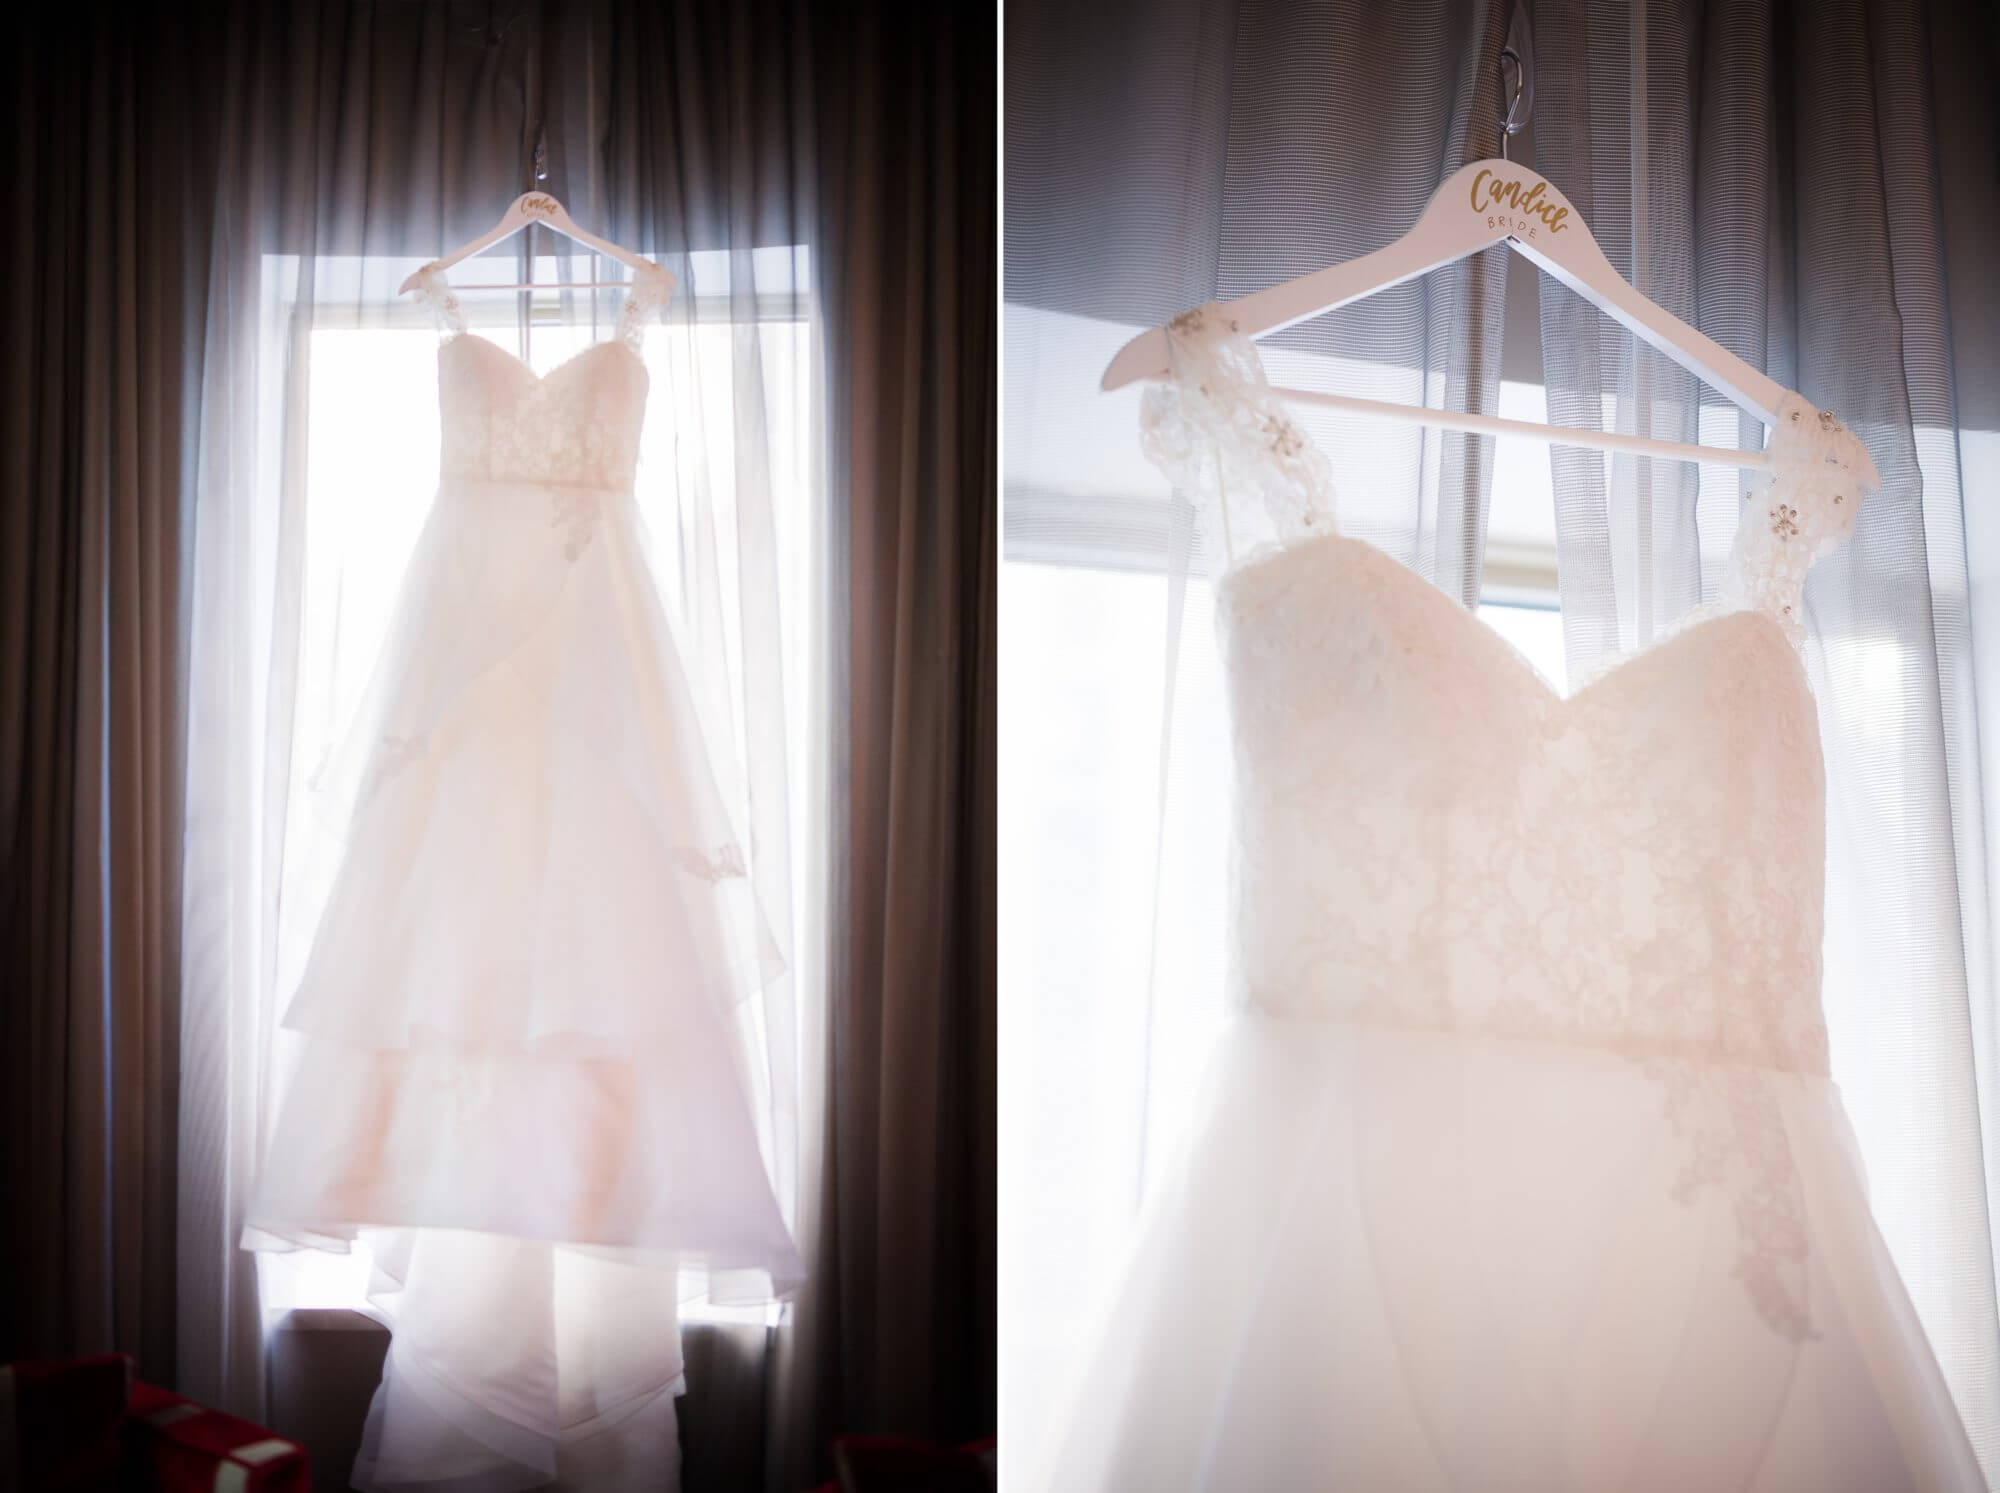 Details of the bride's wedding dress hanging in the window at Omni King Edward Hotel, Toronto